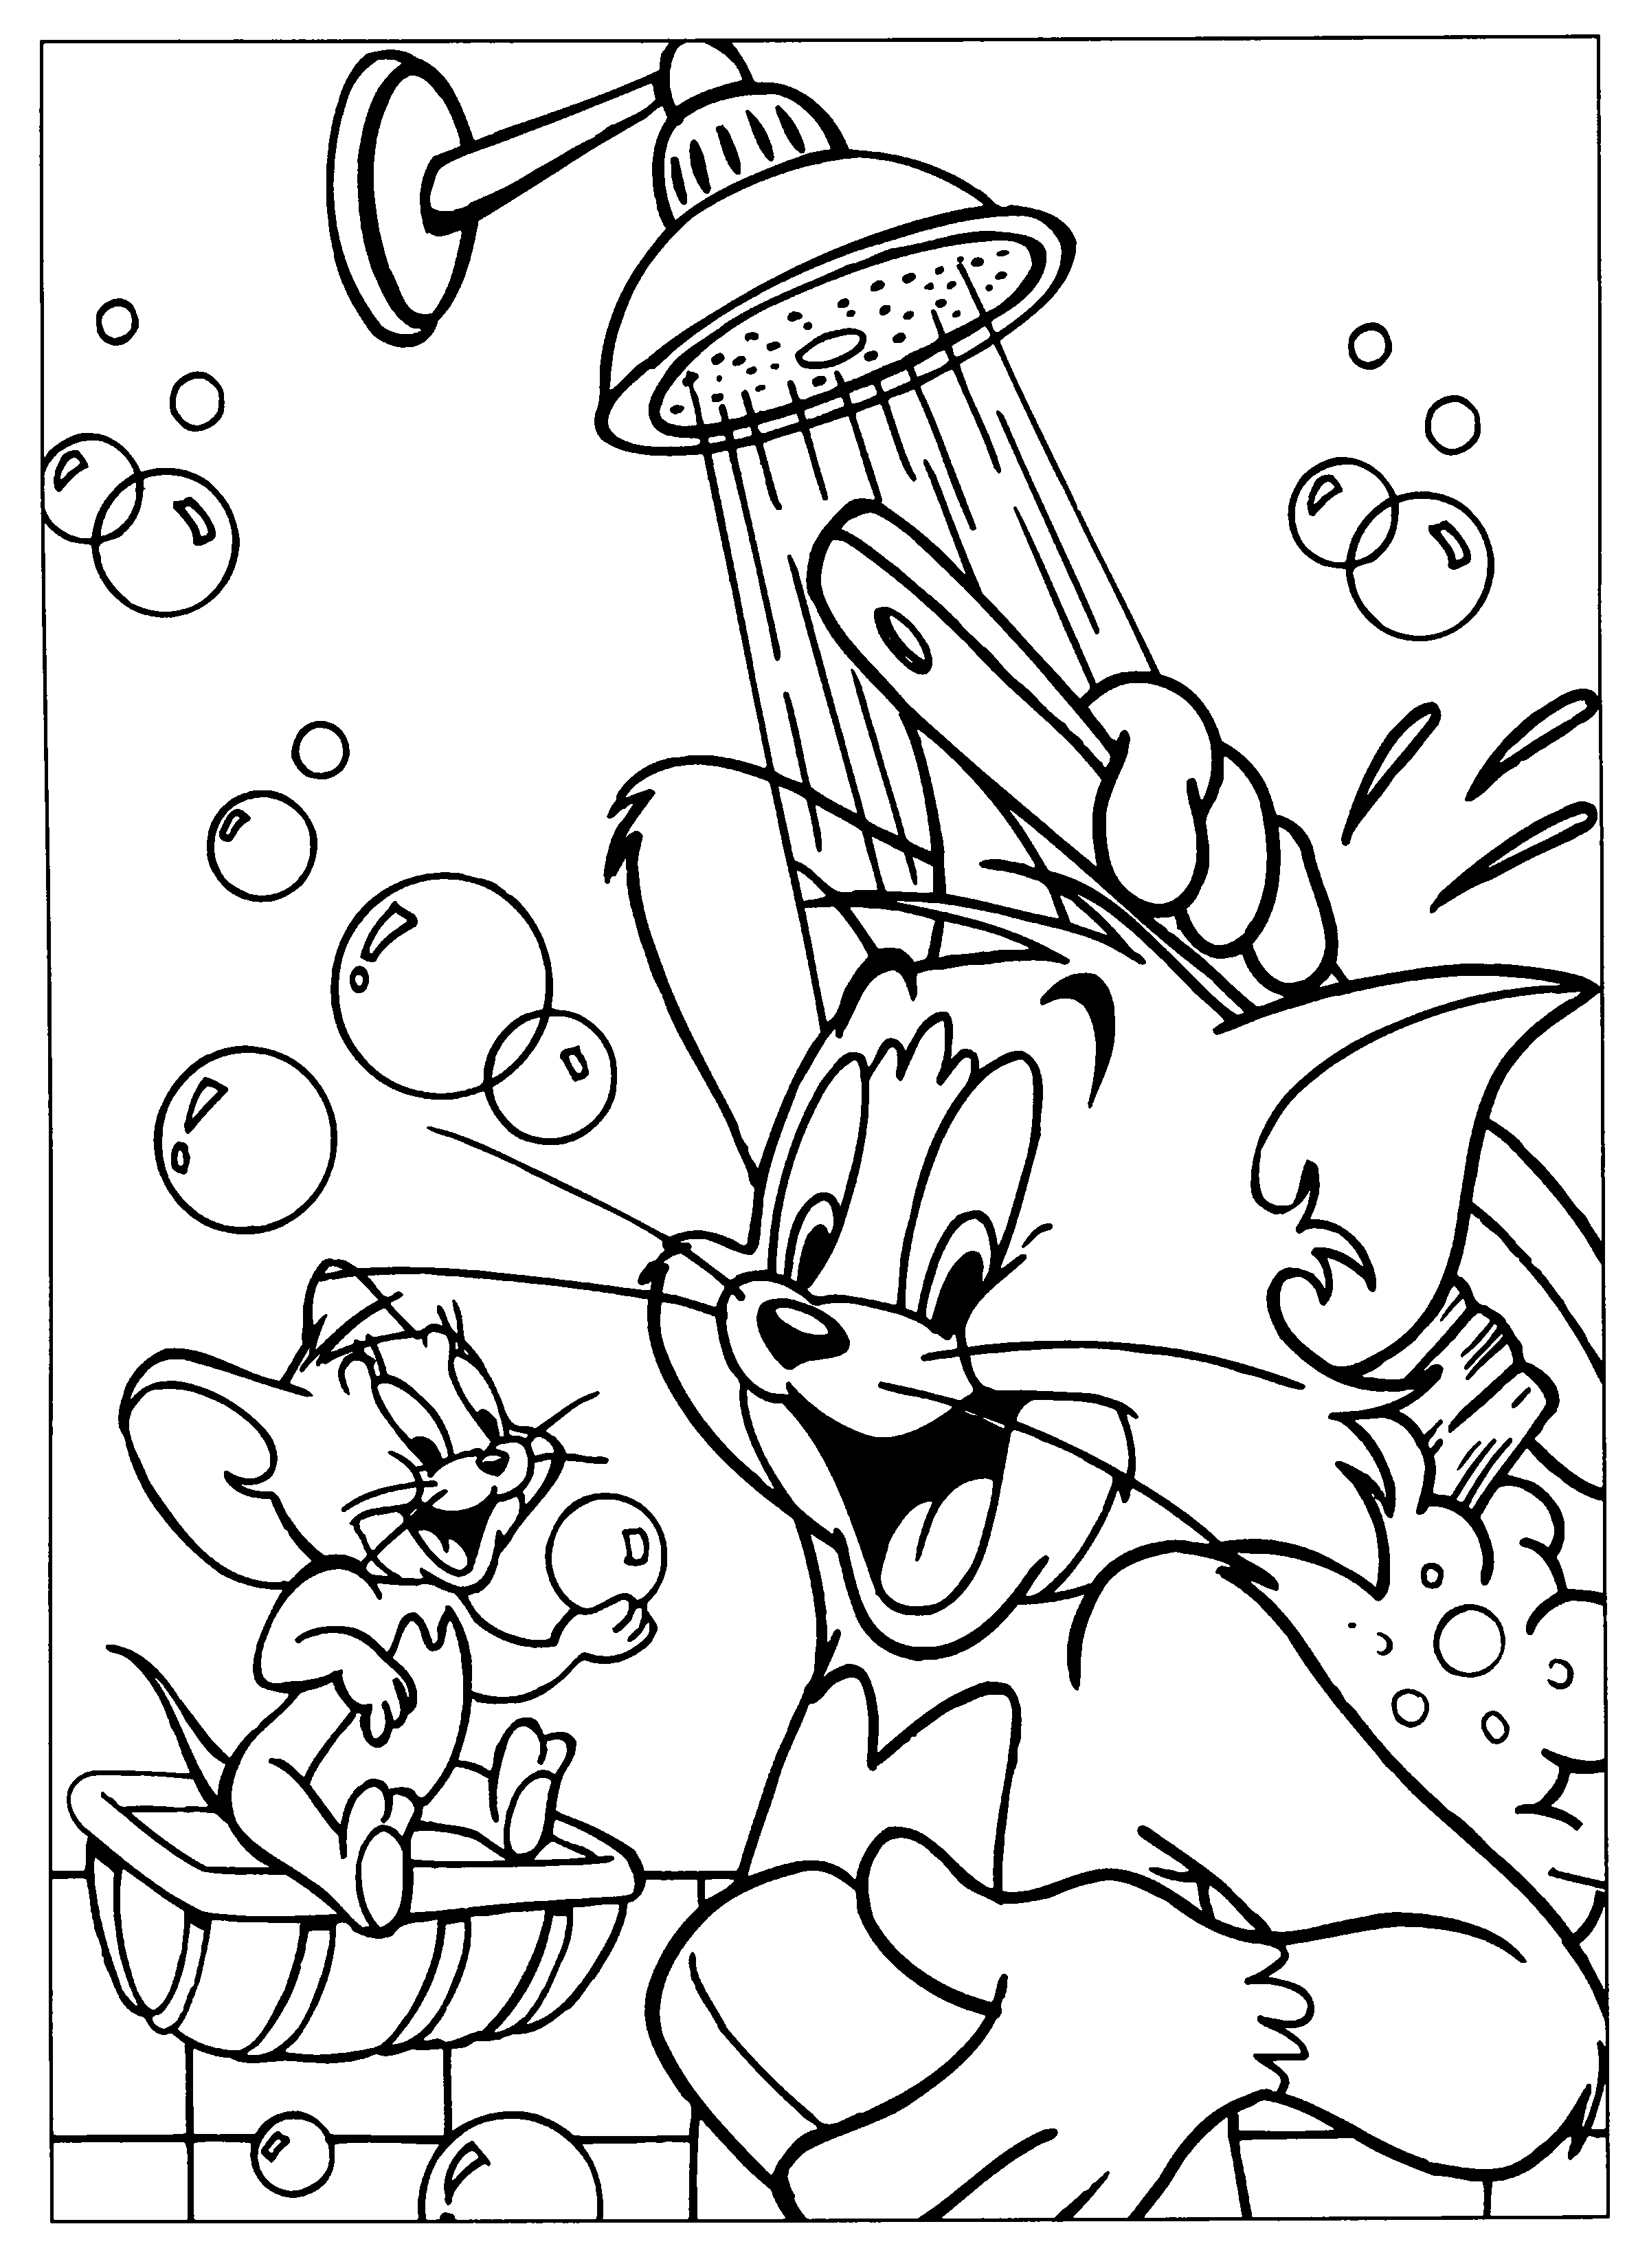 tom and jerry coloring pages online tom and jerry coloring pages gtgt disney coloring pages coloring and jerry tom online pages 